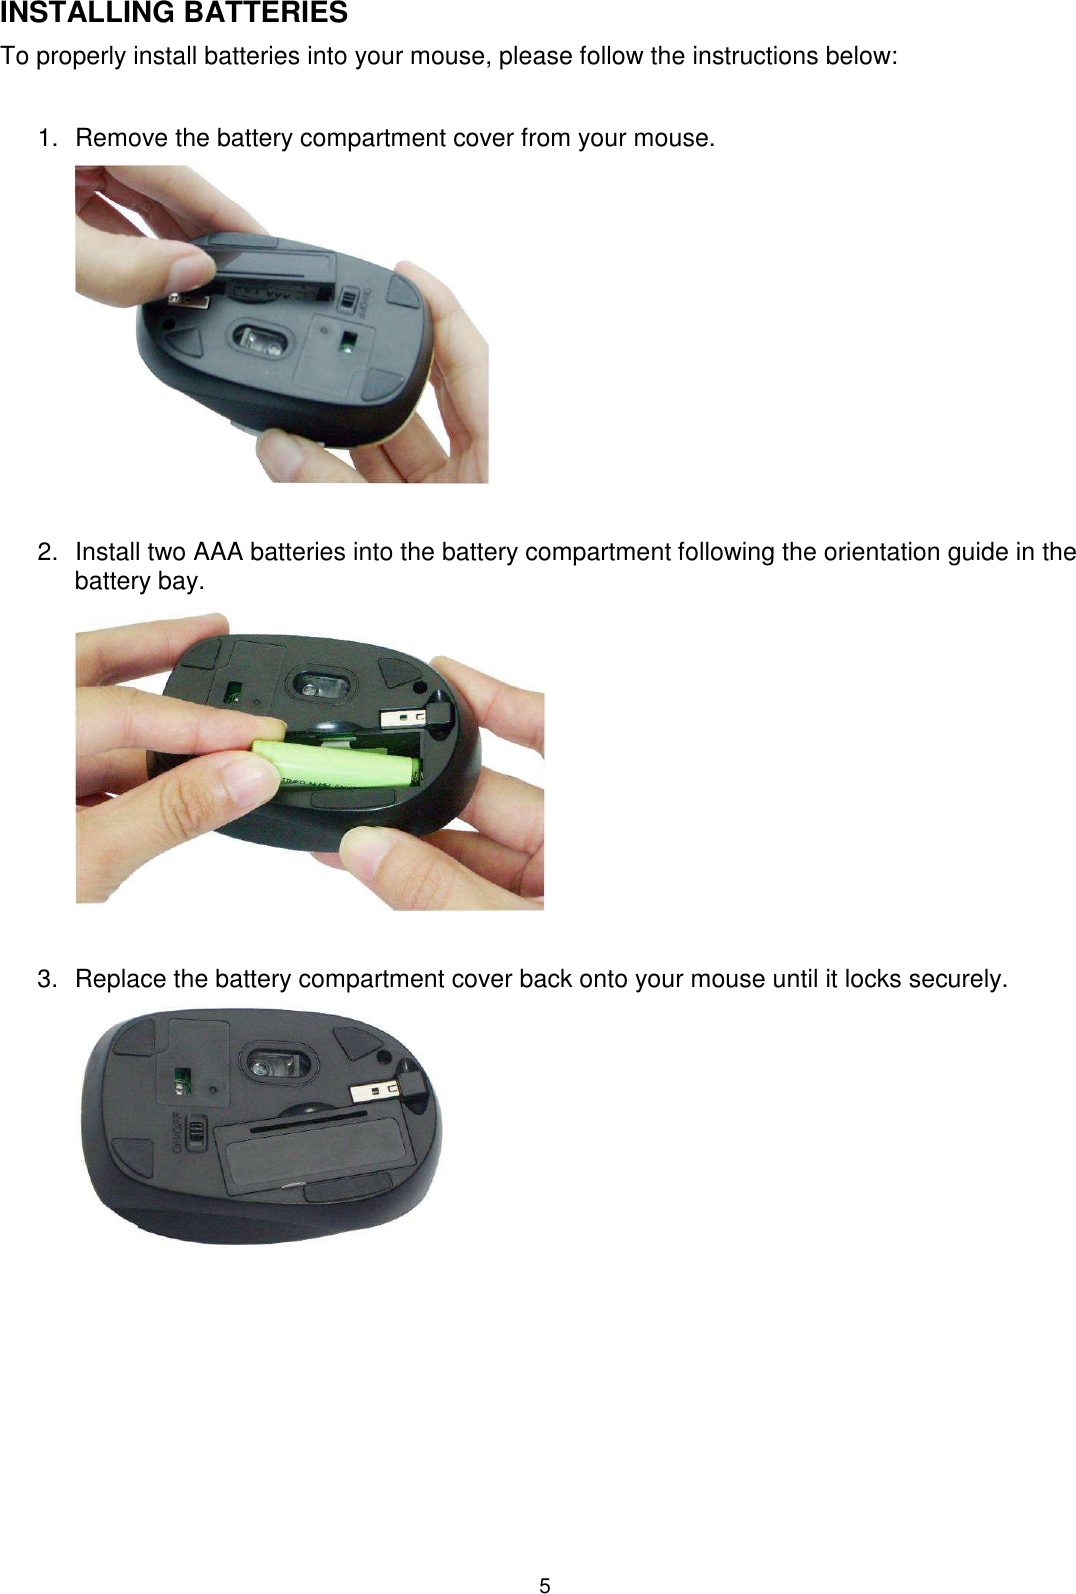 5 INSTALLING BATTERIES To properly install batteries into your mouse, please follow the instructions below:  1.  Remove the battery compartment cover from your mouse.        2.  Install two AAA batteries into the battery compartment following the orientation guide in the battery bay.       3.  Replace the battery compartment cover back onto your mouse until it locks securely.         